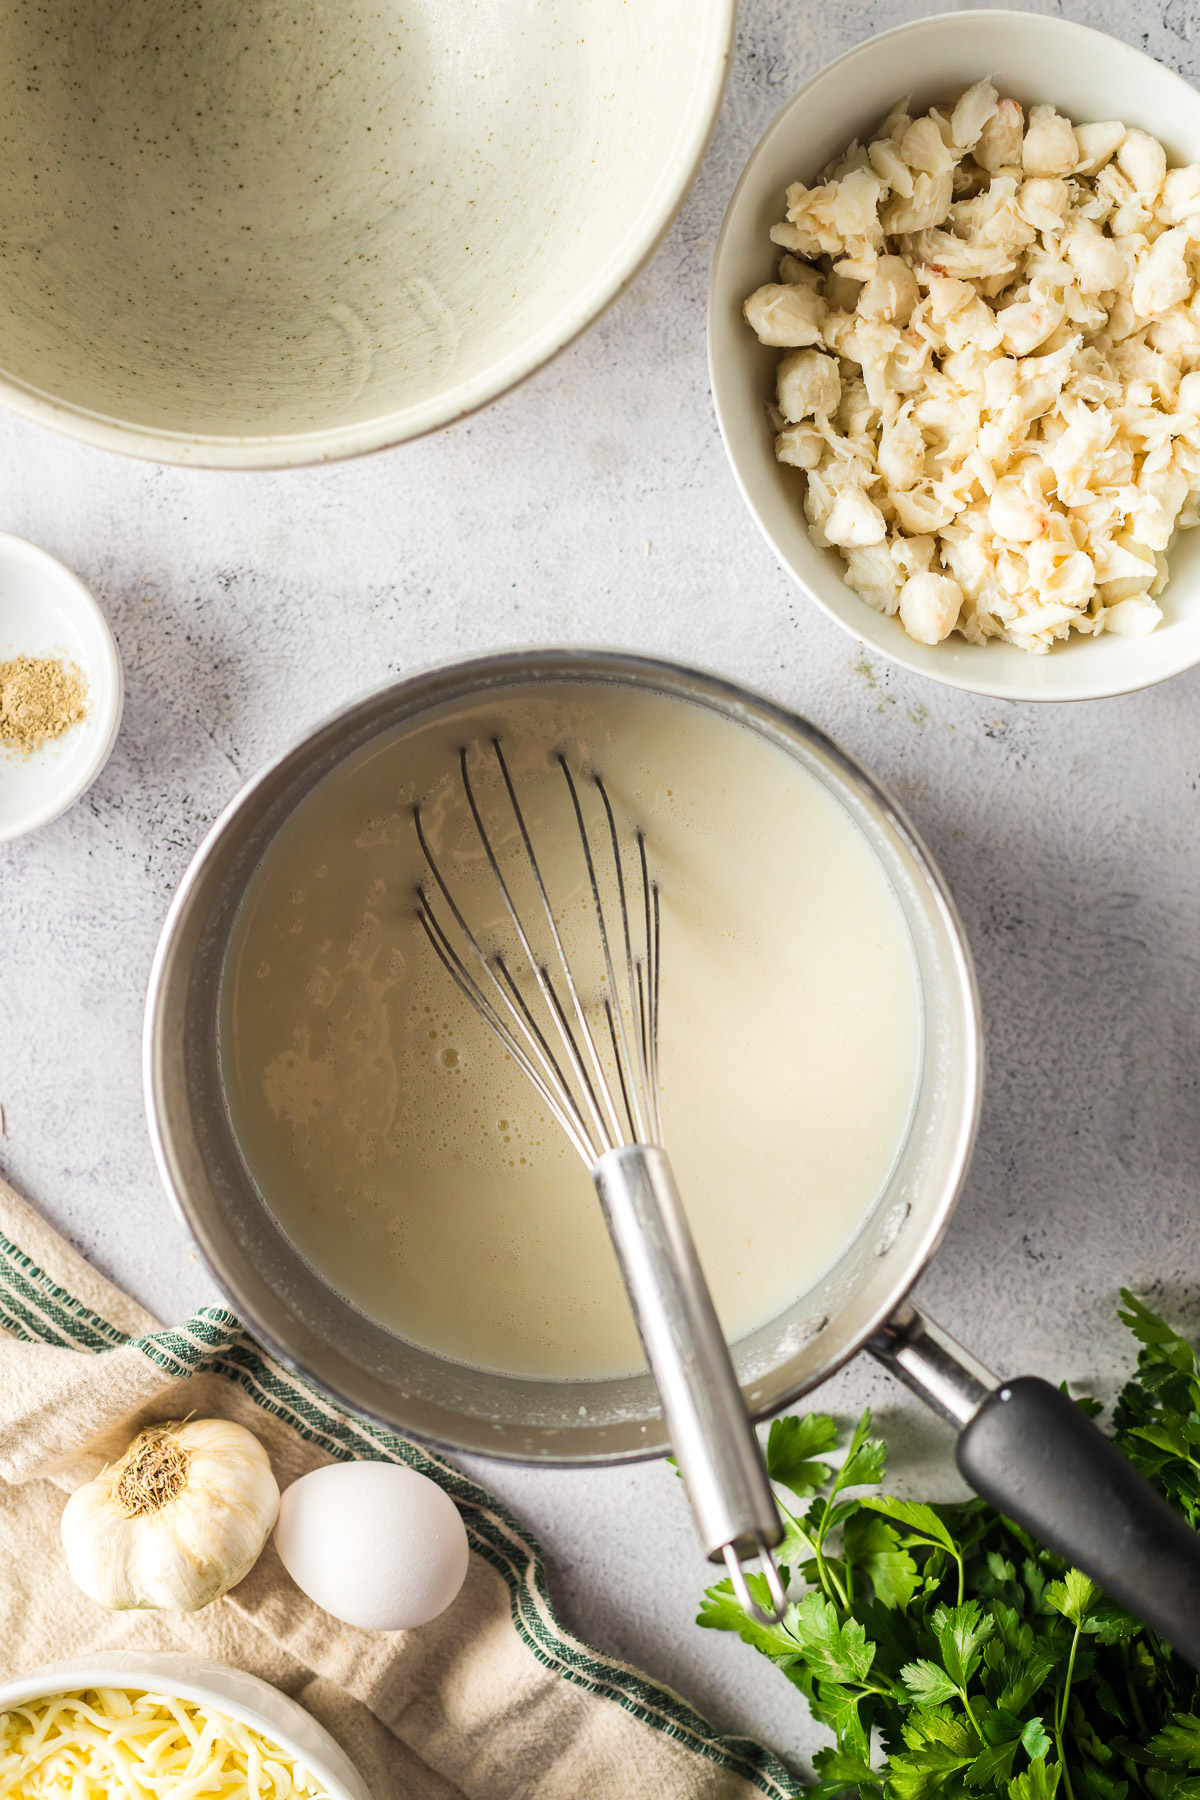 white sauce made with milk, flour, and parmesan cheese